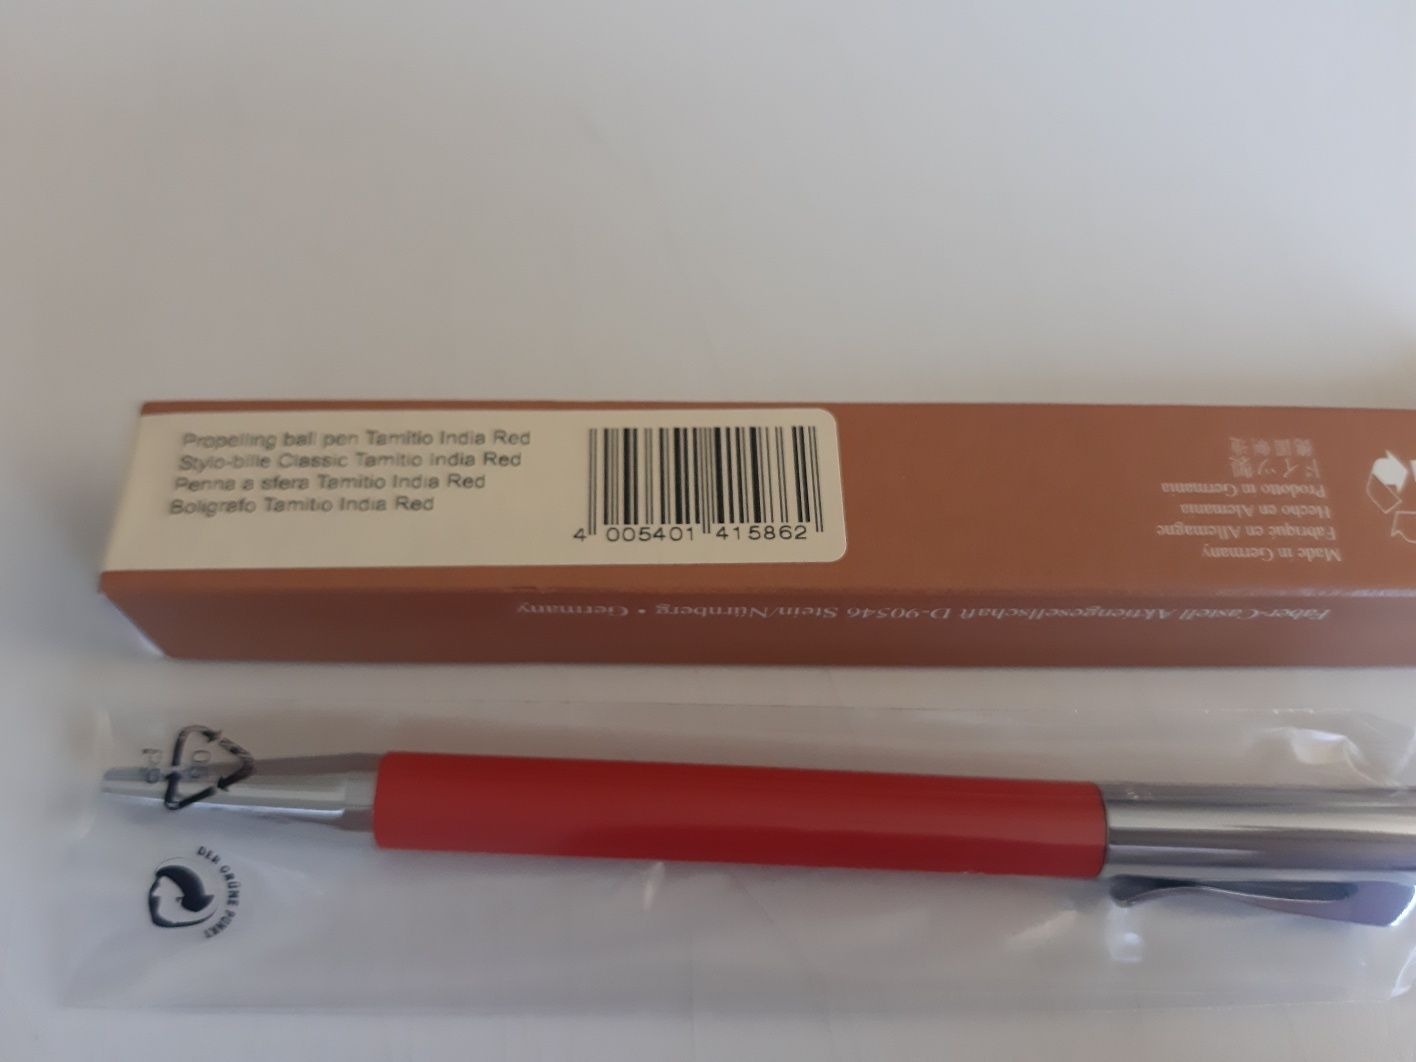 Graf von Faber-Castell Propelling ball pen Tamitio India Red